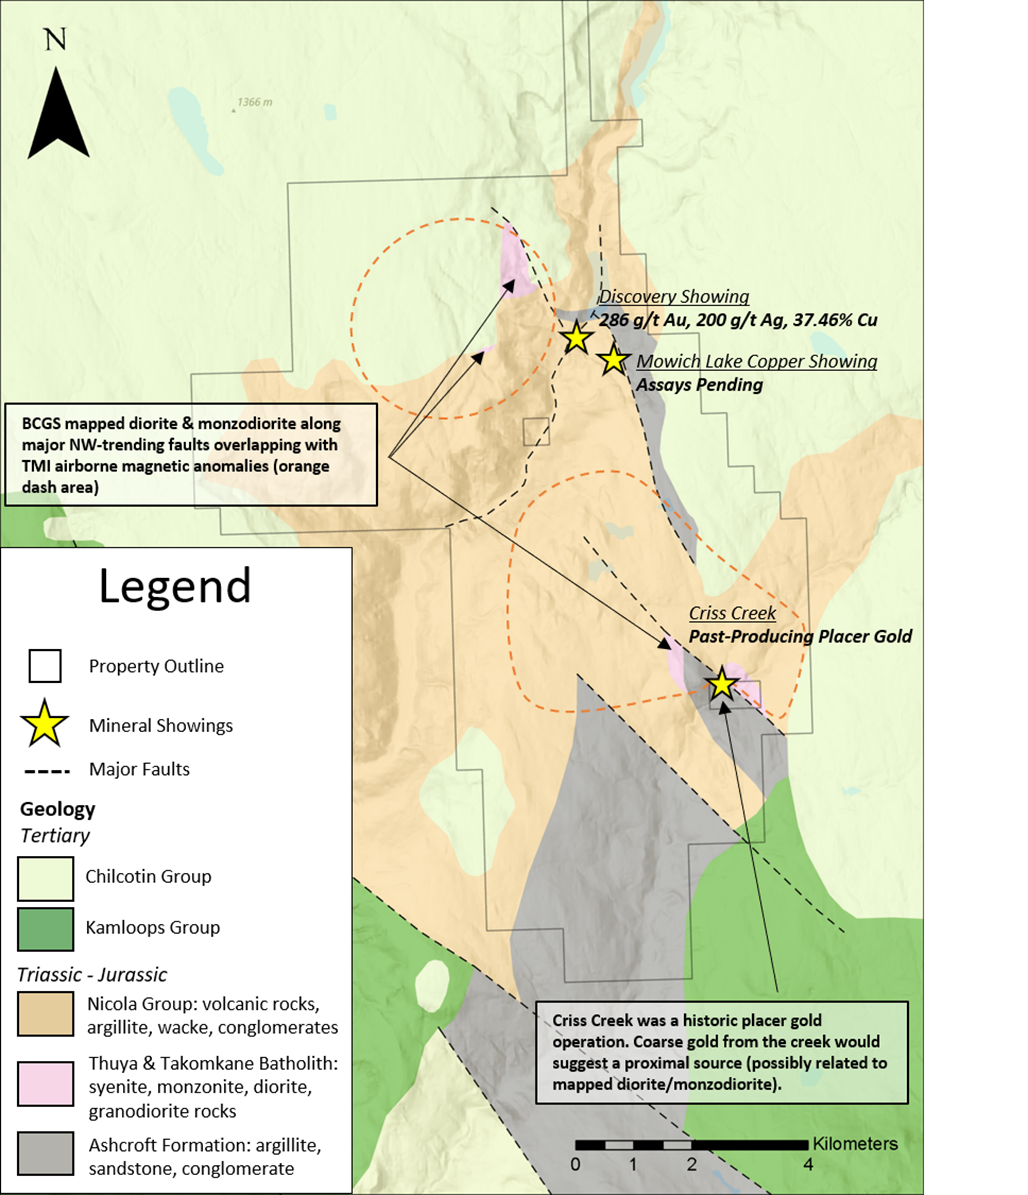 The newly expanded Mowich Zone claims overlying prospective intrusive diorites/monzodiorites and geophysical magnetic anomalies. The high-grade results from the Discovery showing are a strong indicator of the mineral potential in the area.